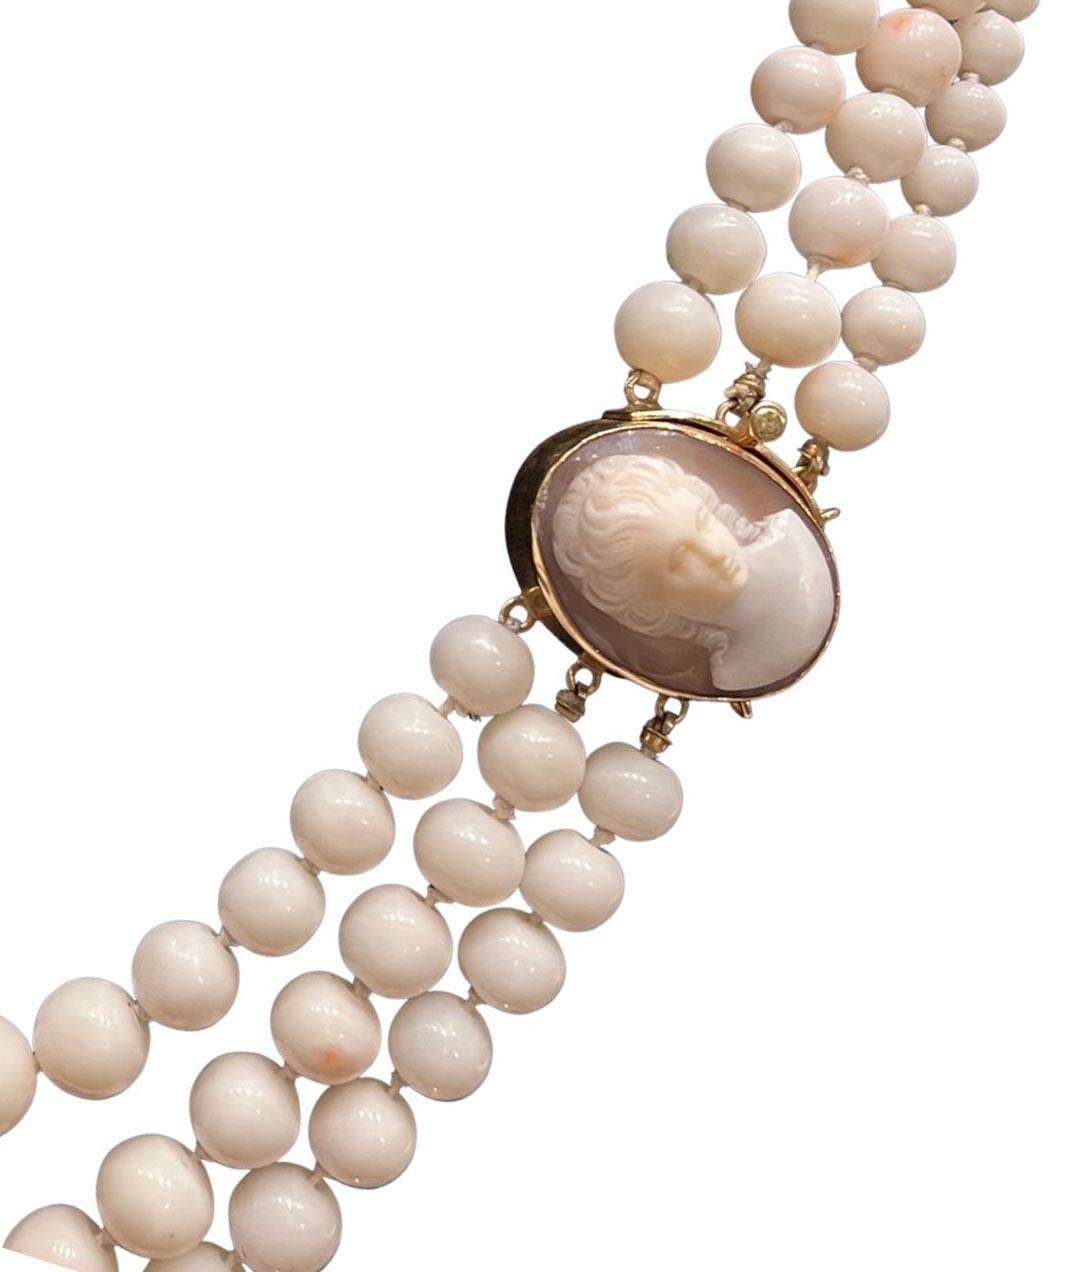 Cabochon Natural Angel Skin Coral Necklace with Coral Cameo Clasp Set in 14k Yellow Gold